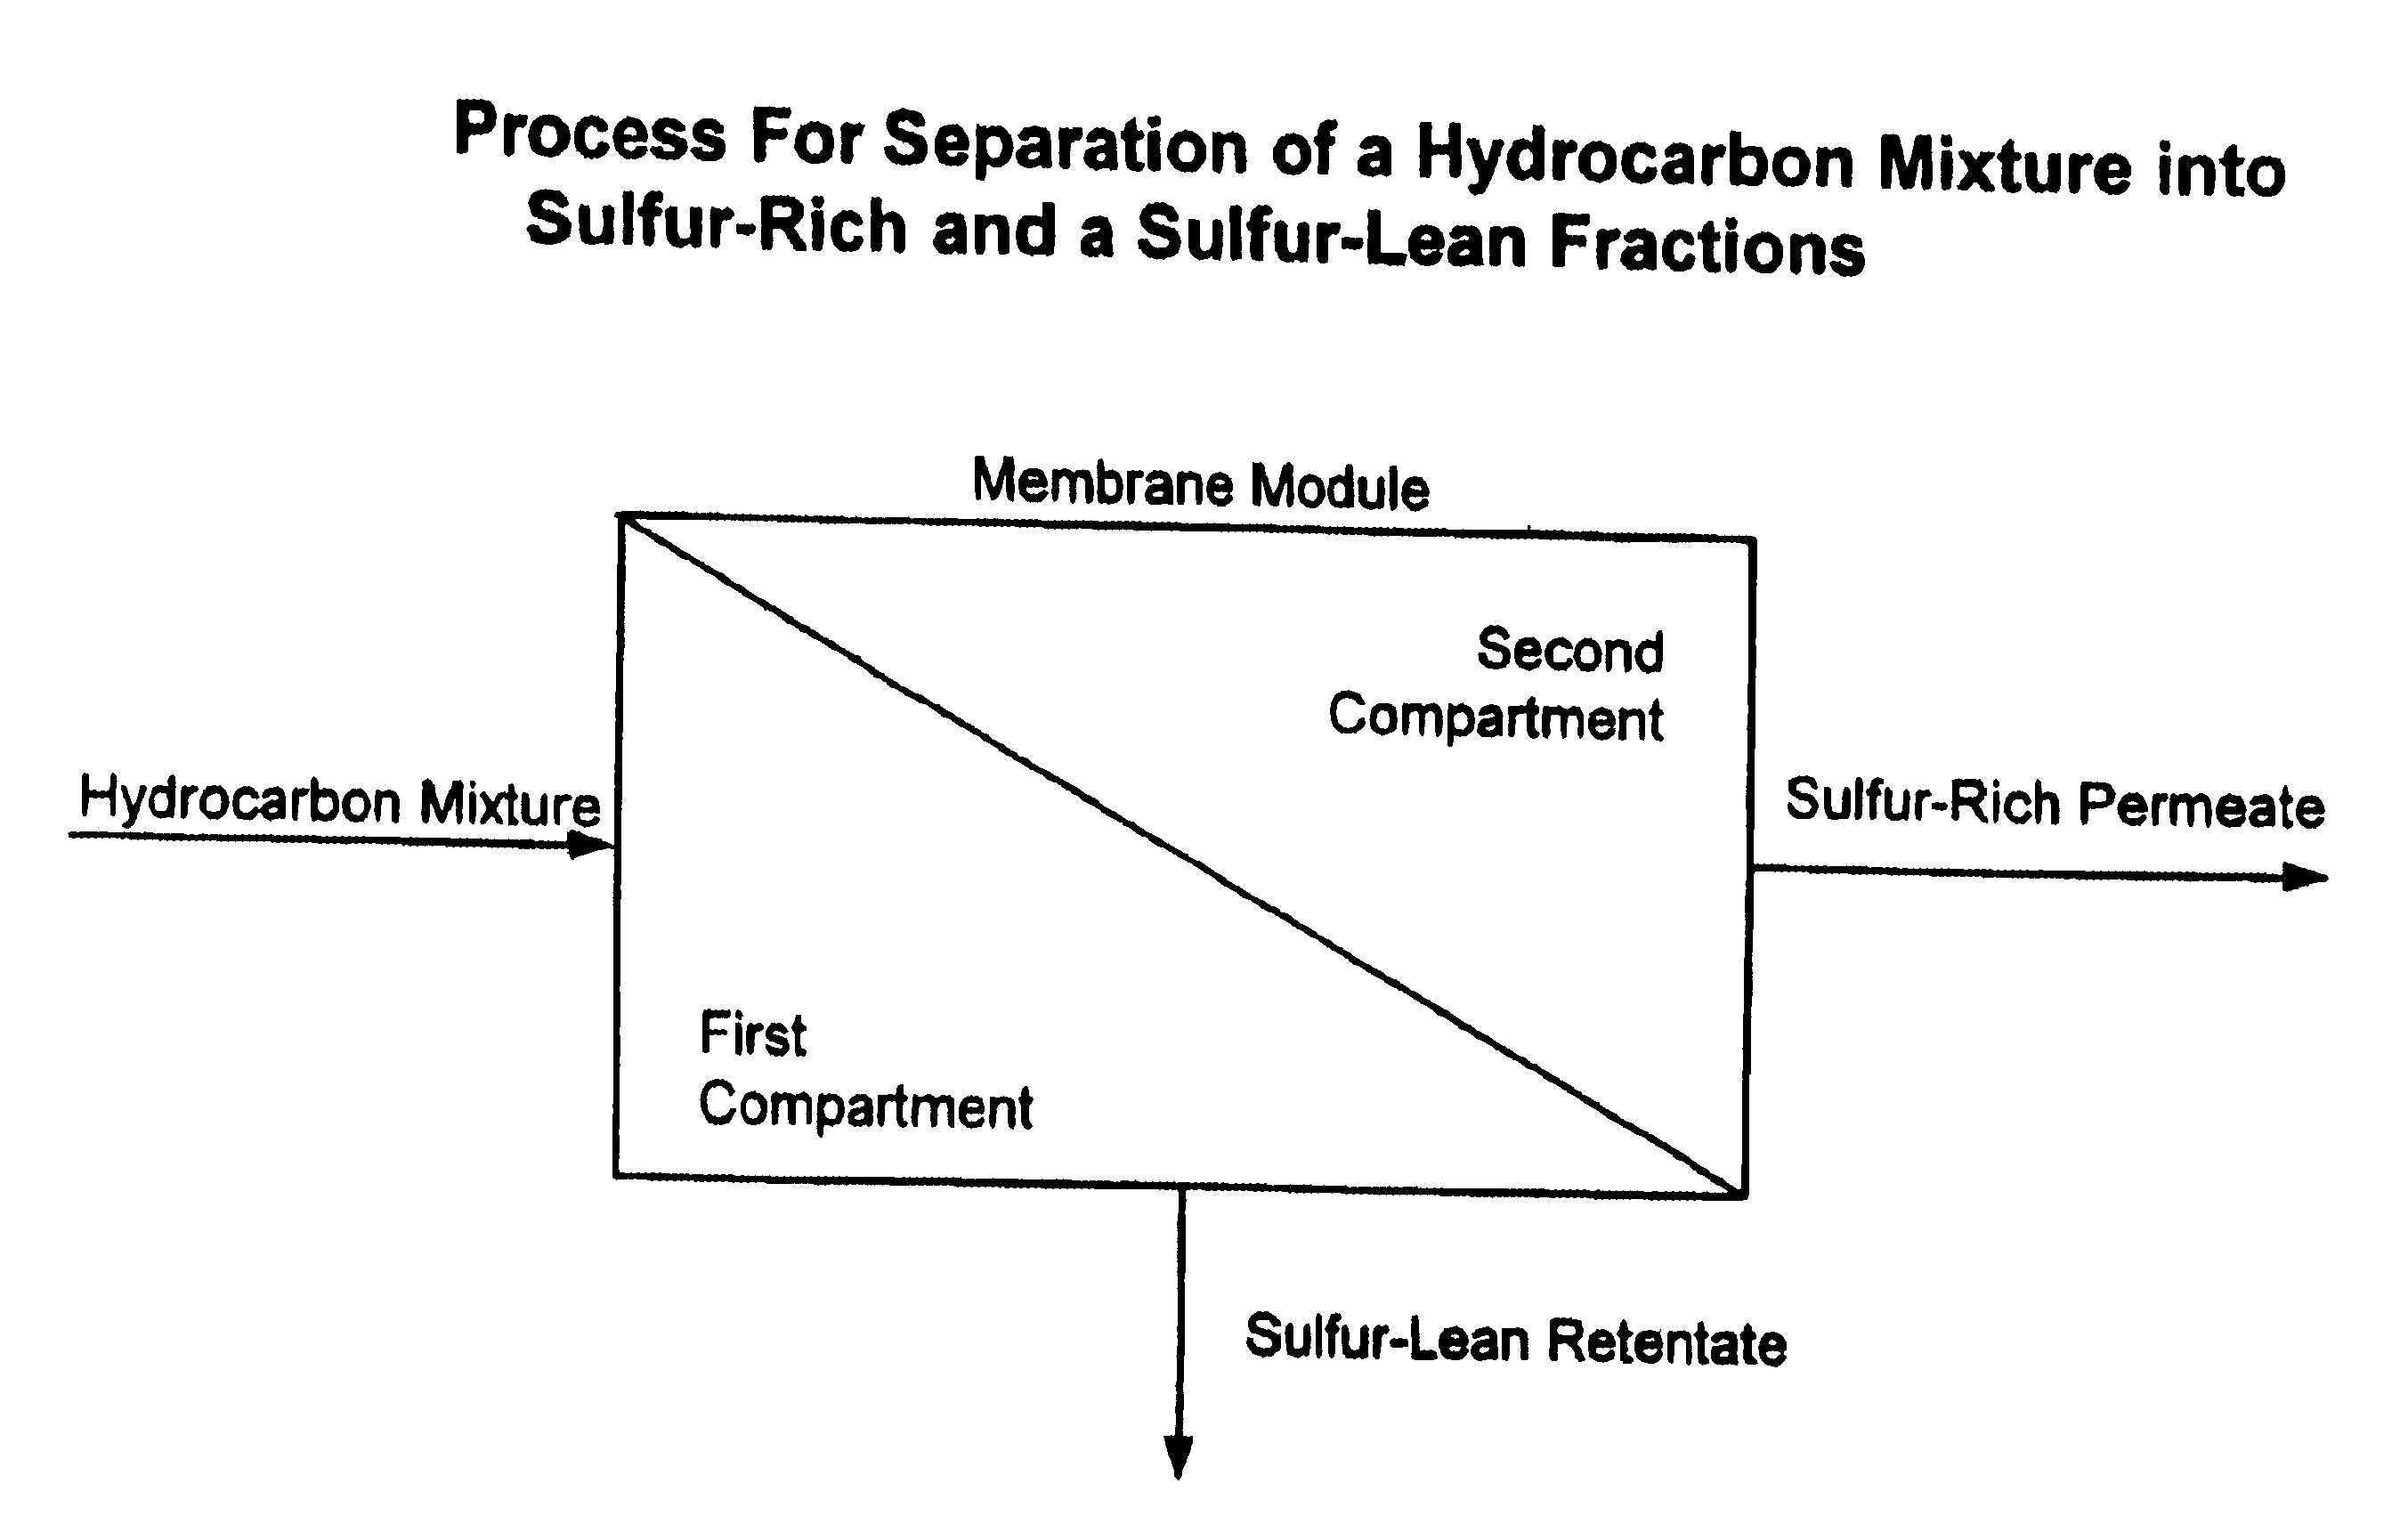 Ionic membranes for organic sulfur separation from liquid hydrocarbon solutions